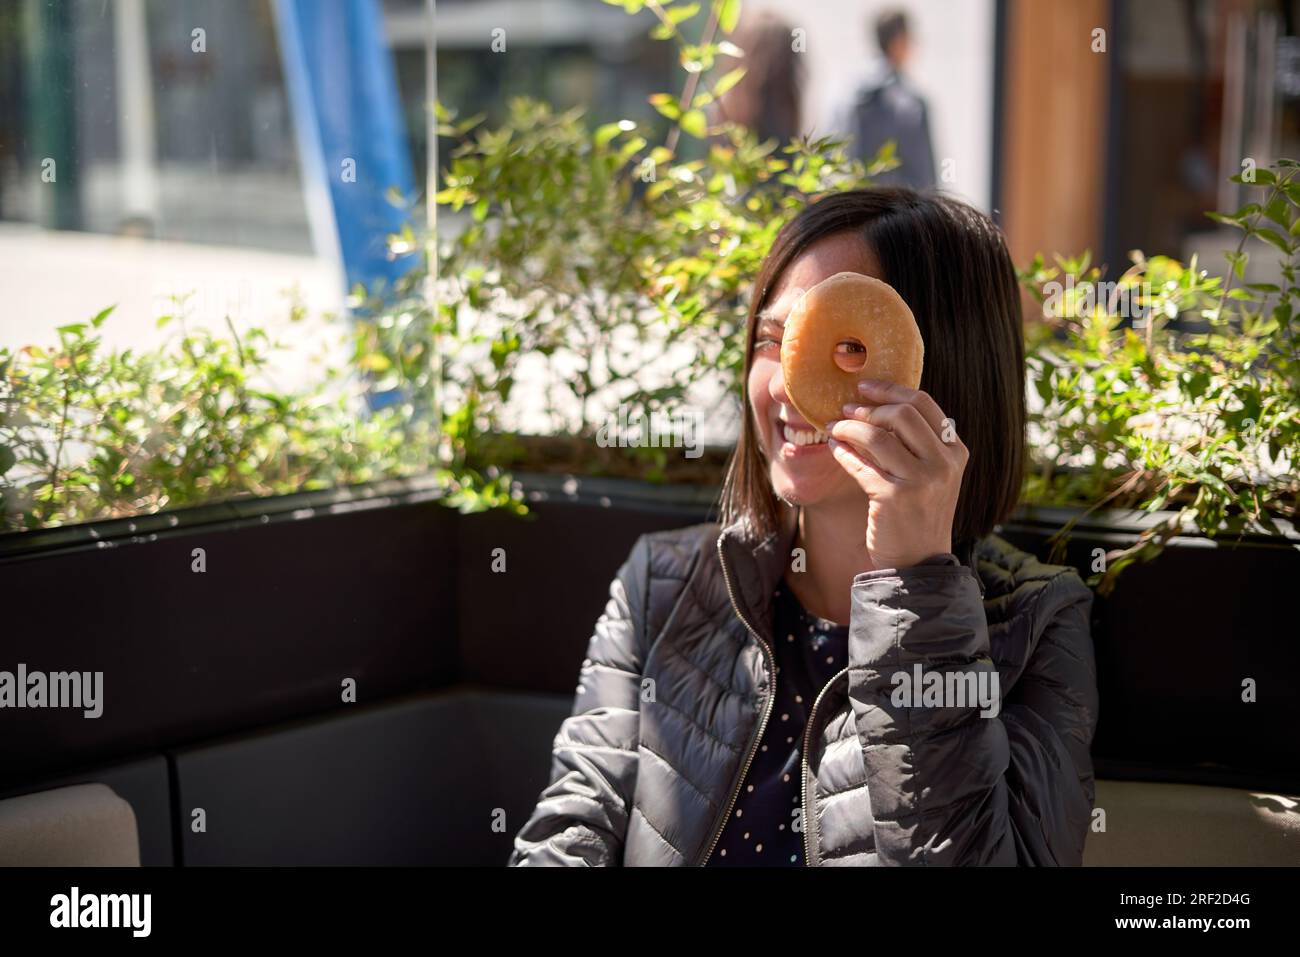 Woman having breakfast and joking with a doughnut on her face Stock Photo